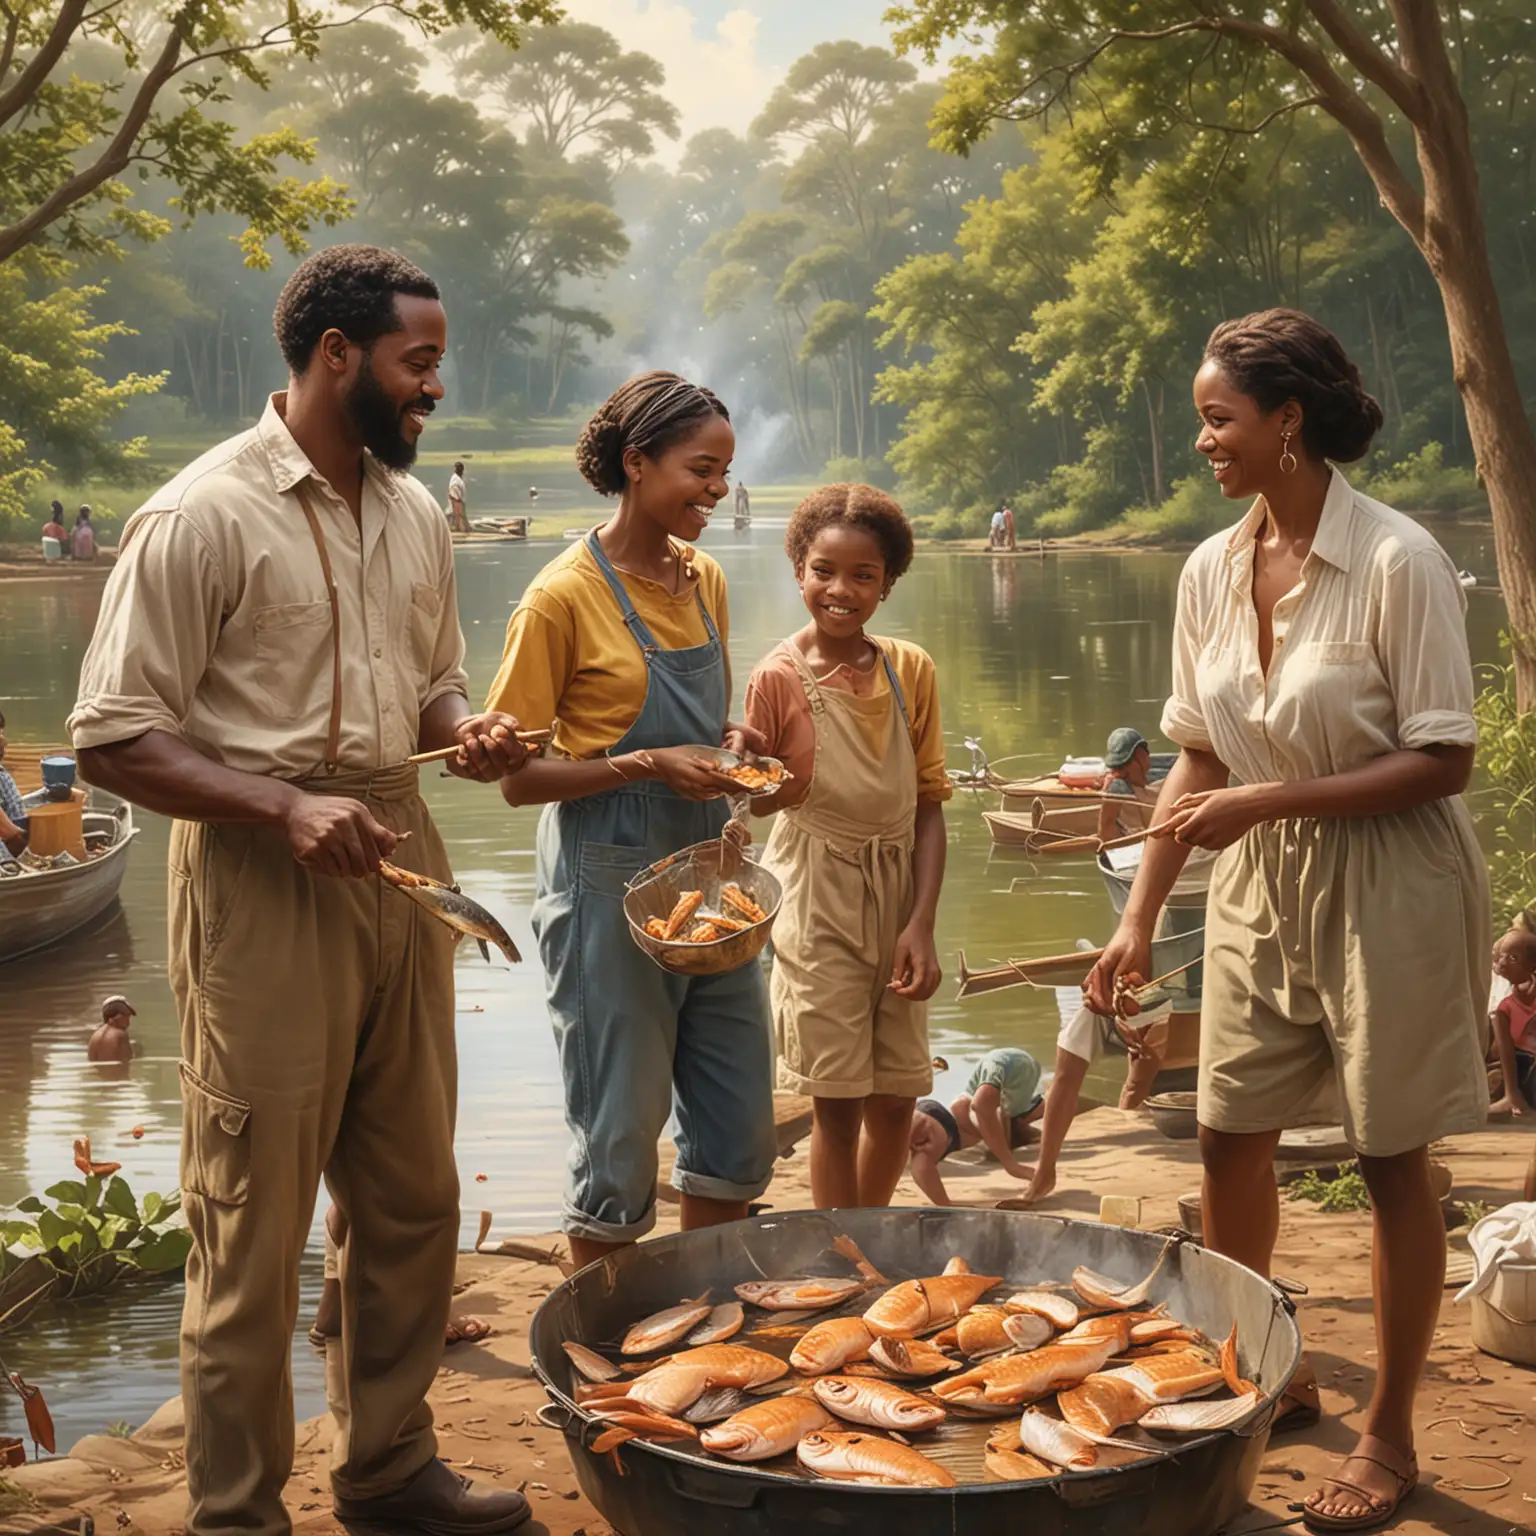 paint a picture of a southern style African American family having an outdoor fish fry, Show 2 people fishing in the background